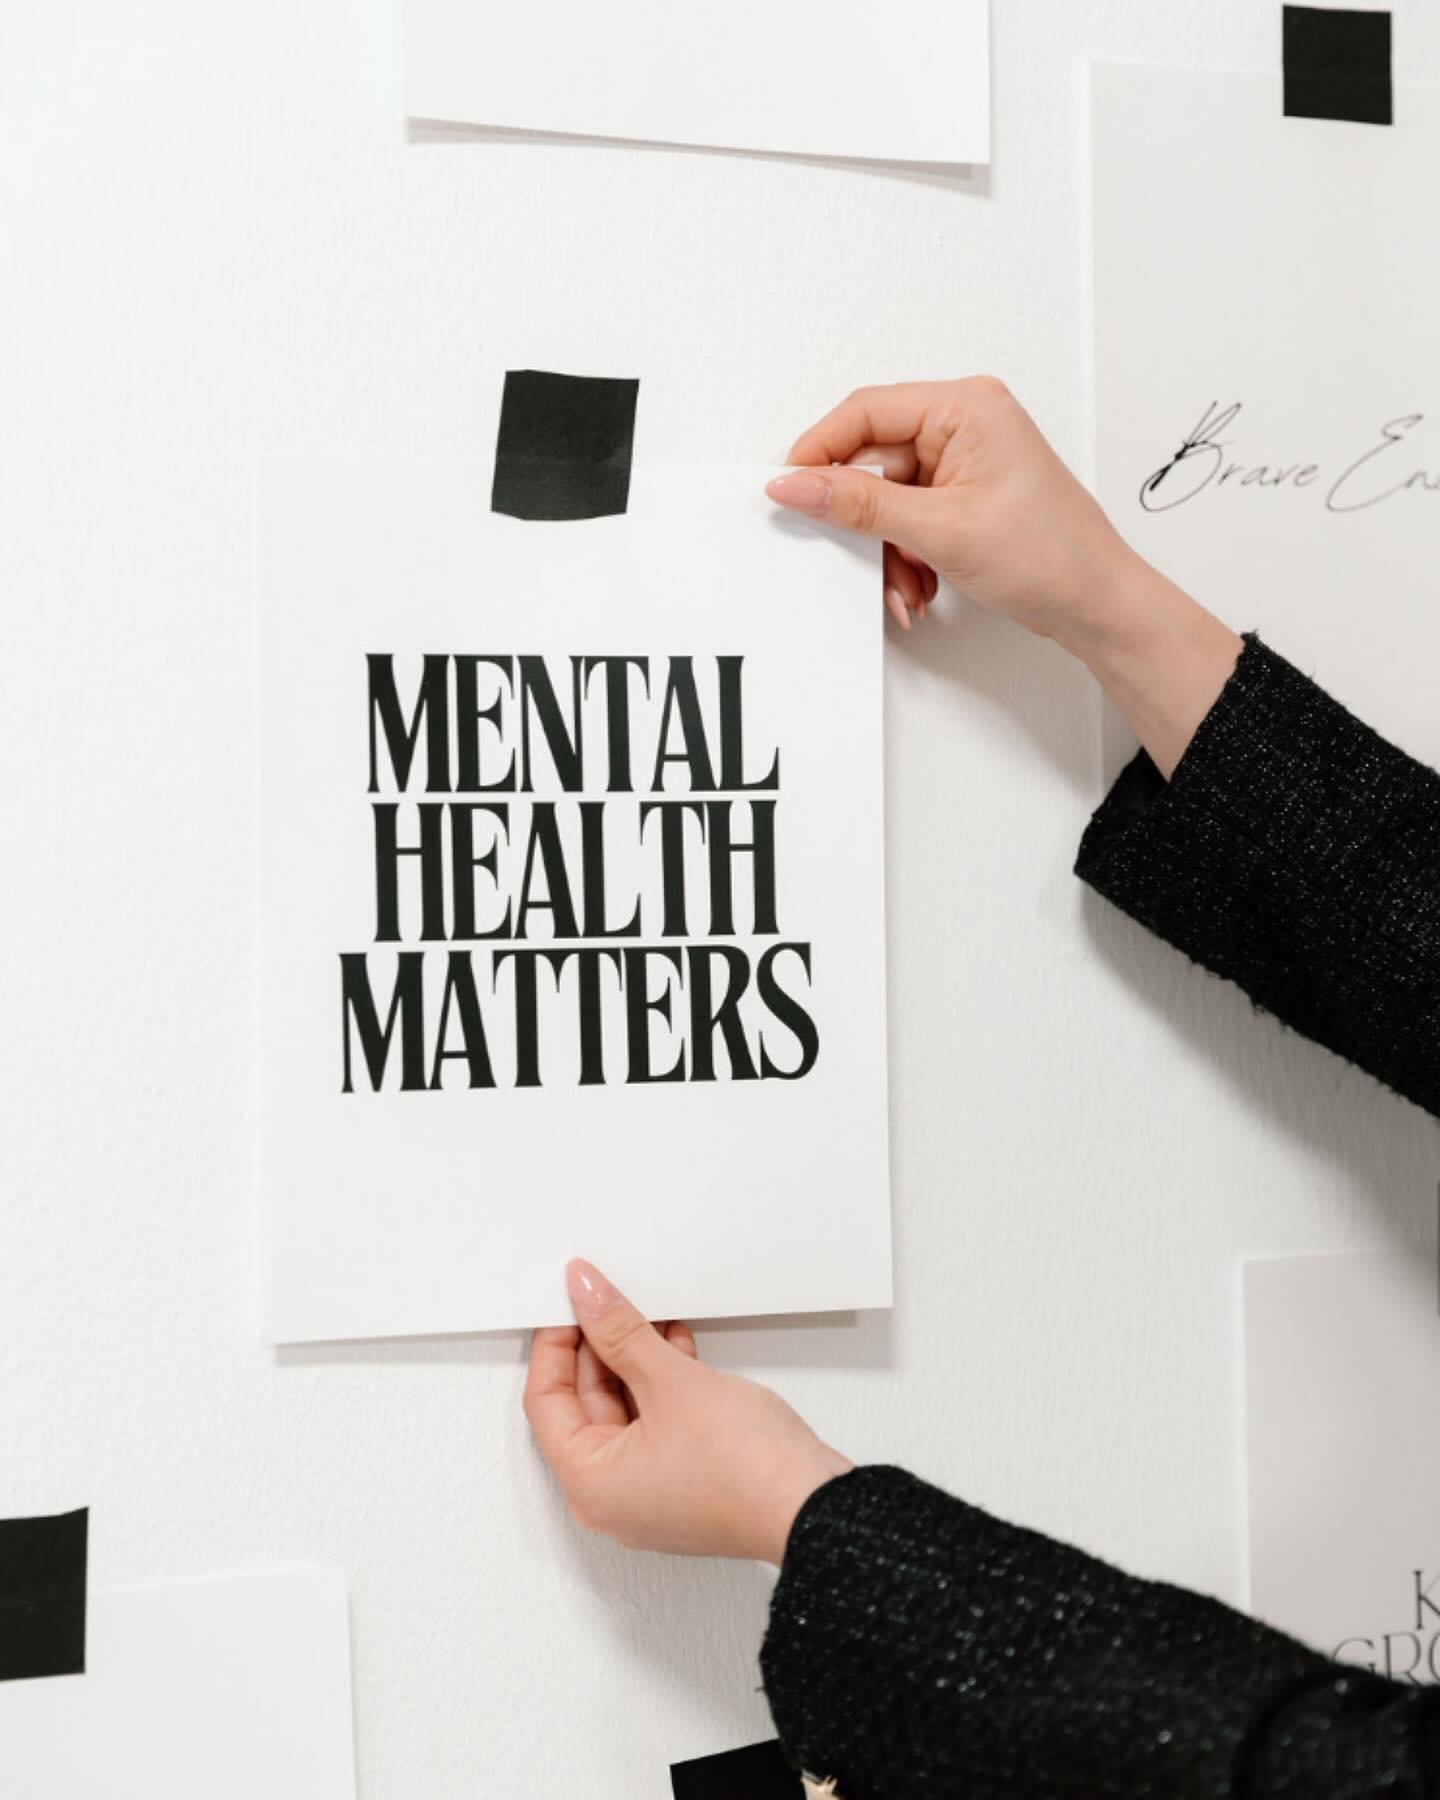 May is Mental Health Month, a time to shed light on the battles many face silently. 

Stigma still looms, deterring countless from seeking help. But there&rsquo;s hope- awareness and advocacy efforts are growing, fostering understanding and access to